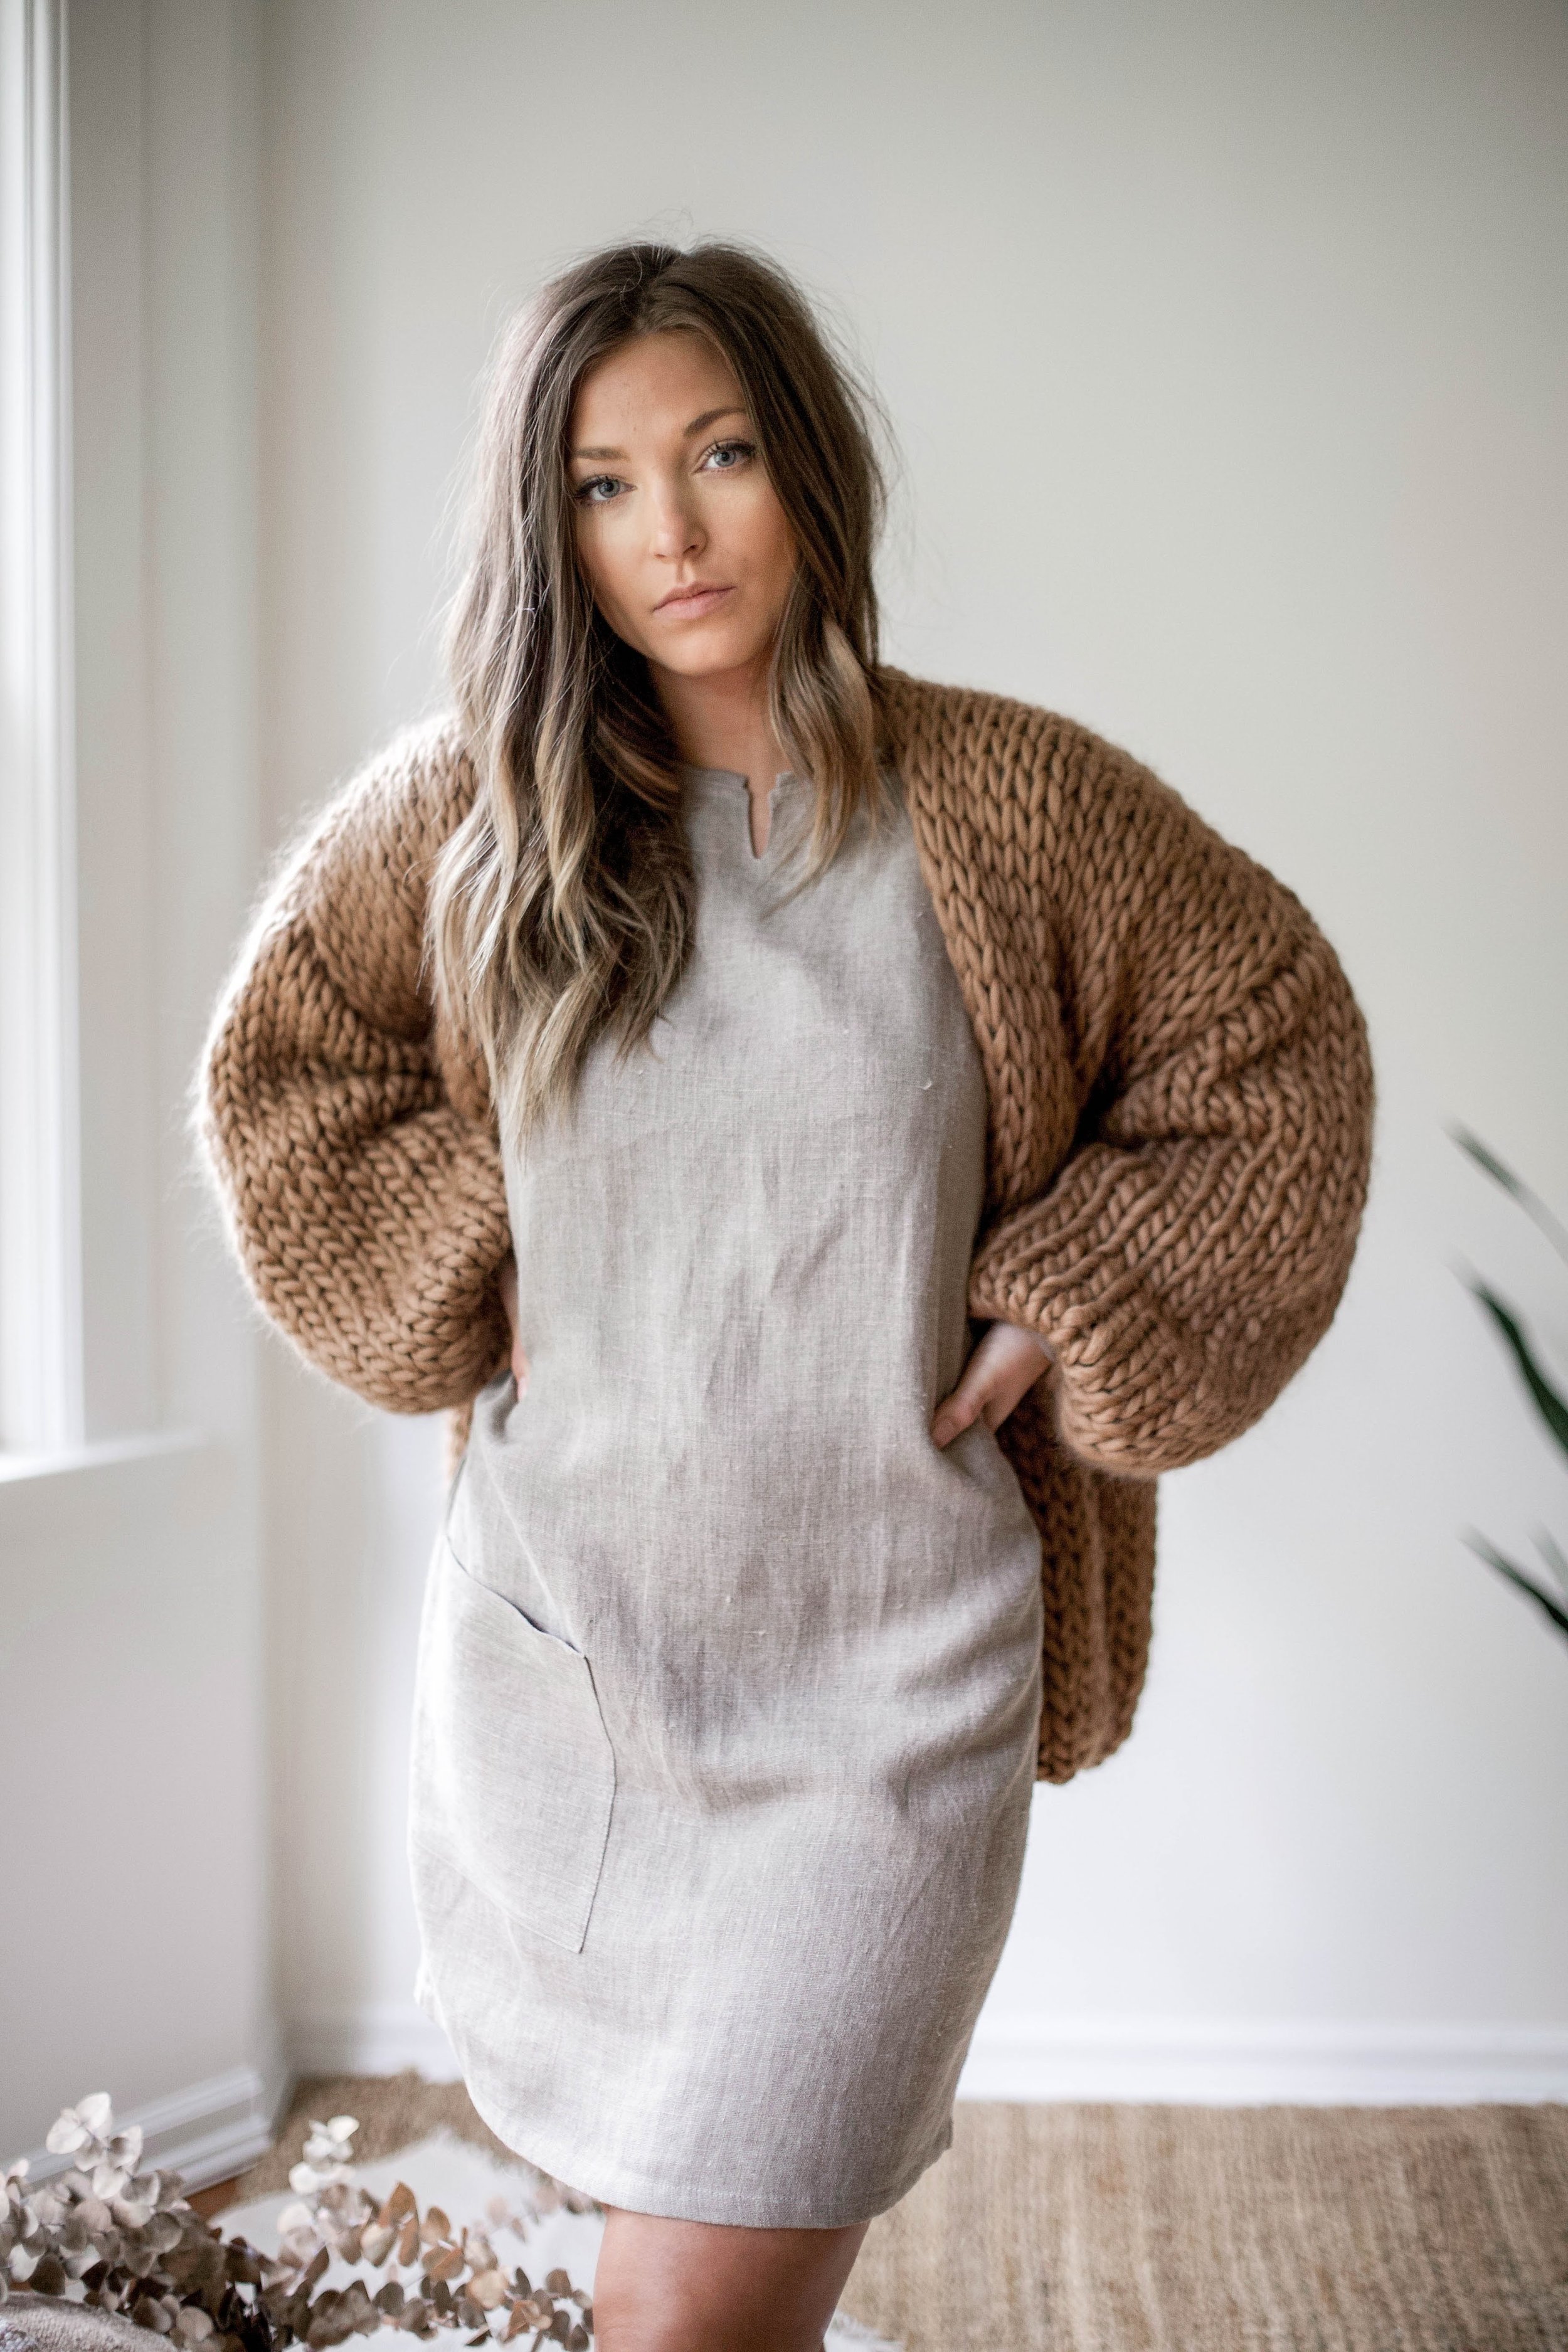 nomi-designs_ali-dress_natural-linen-dress-with-pockets_front_styled-with-oversized-hendik-lou-sweater-details.jpg